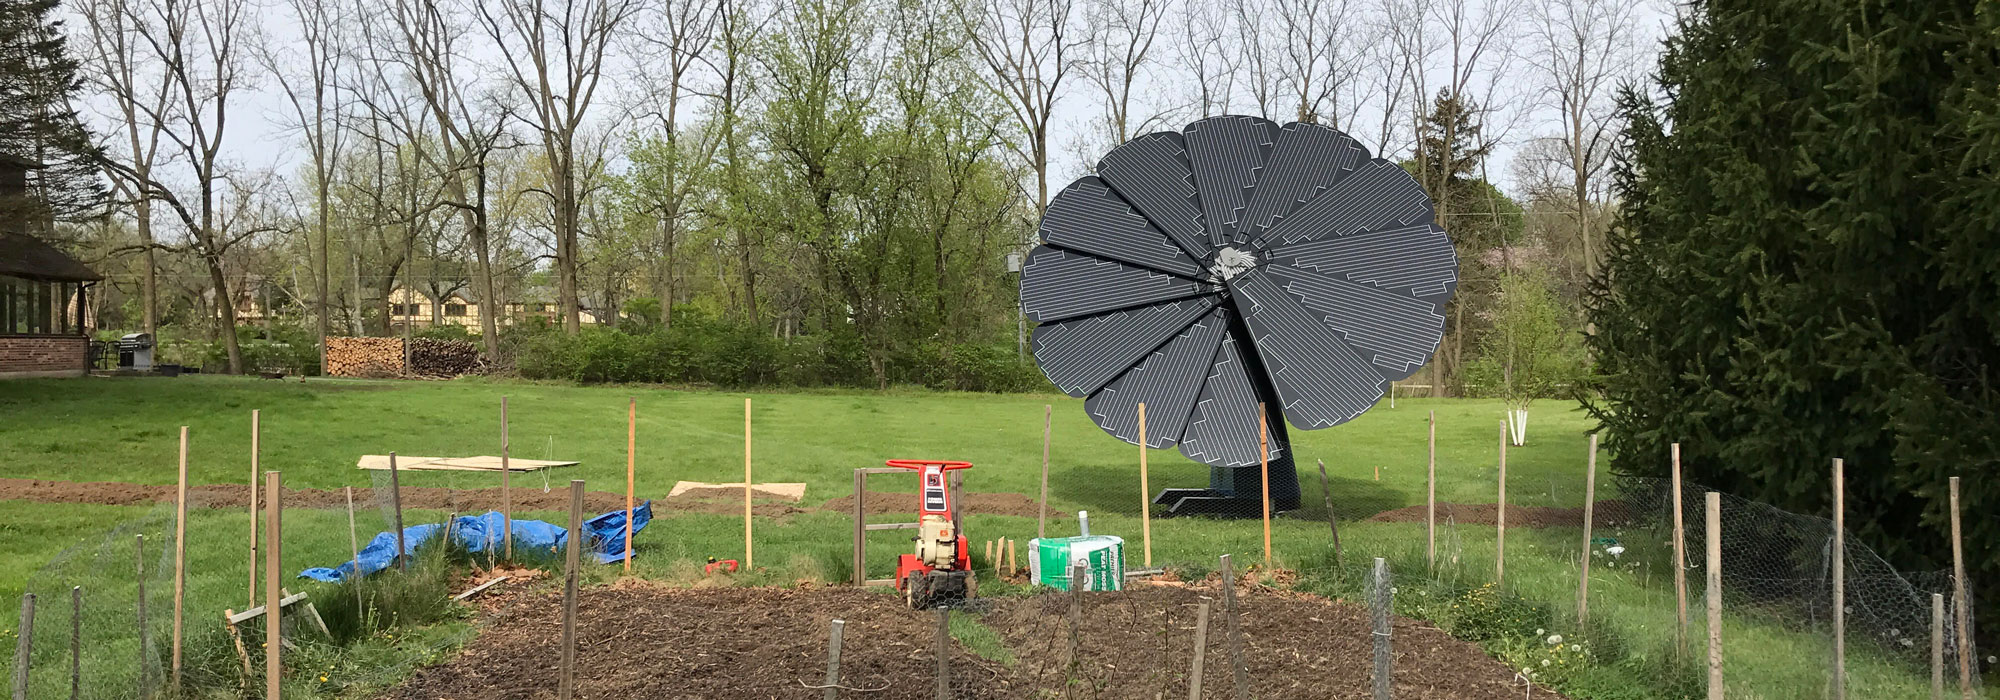 The SmartFlower Solar Panel Overlooks a Small Gardening Patch in the Midwest